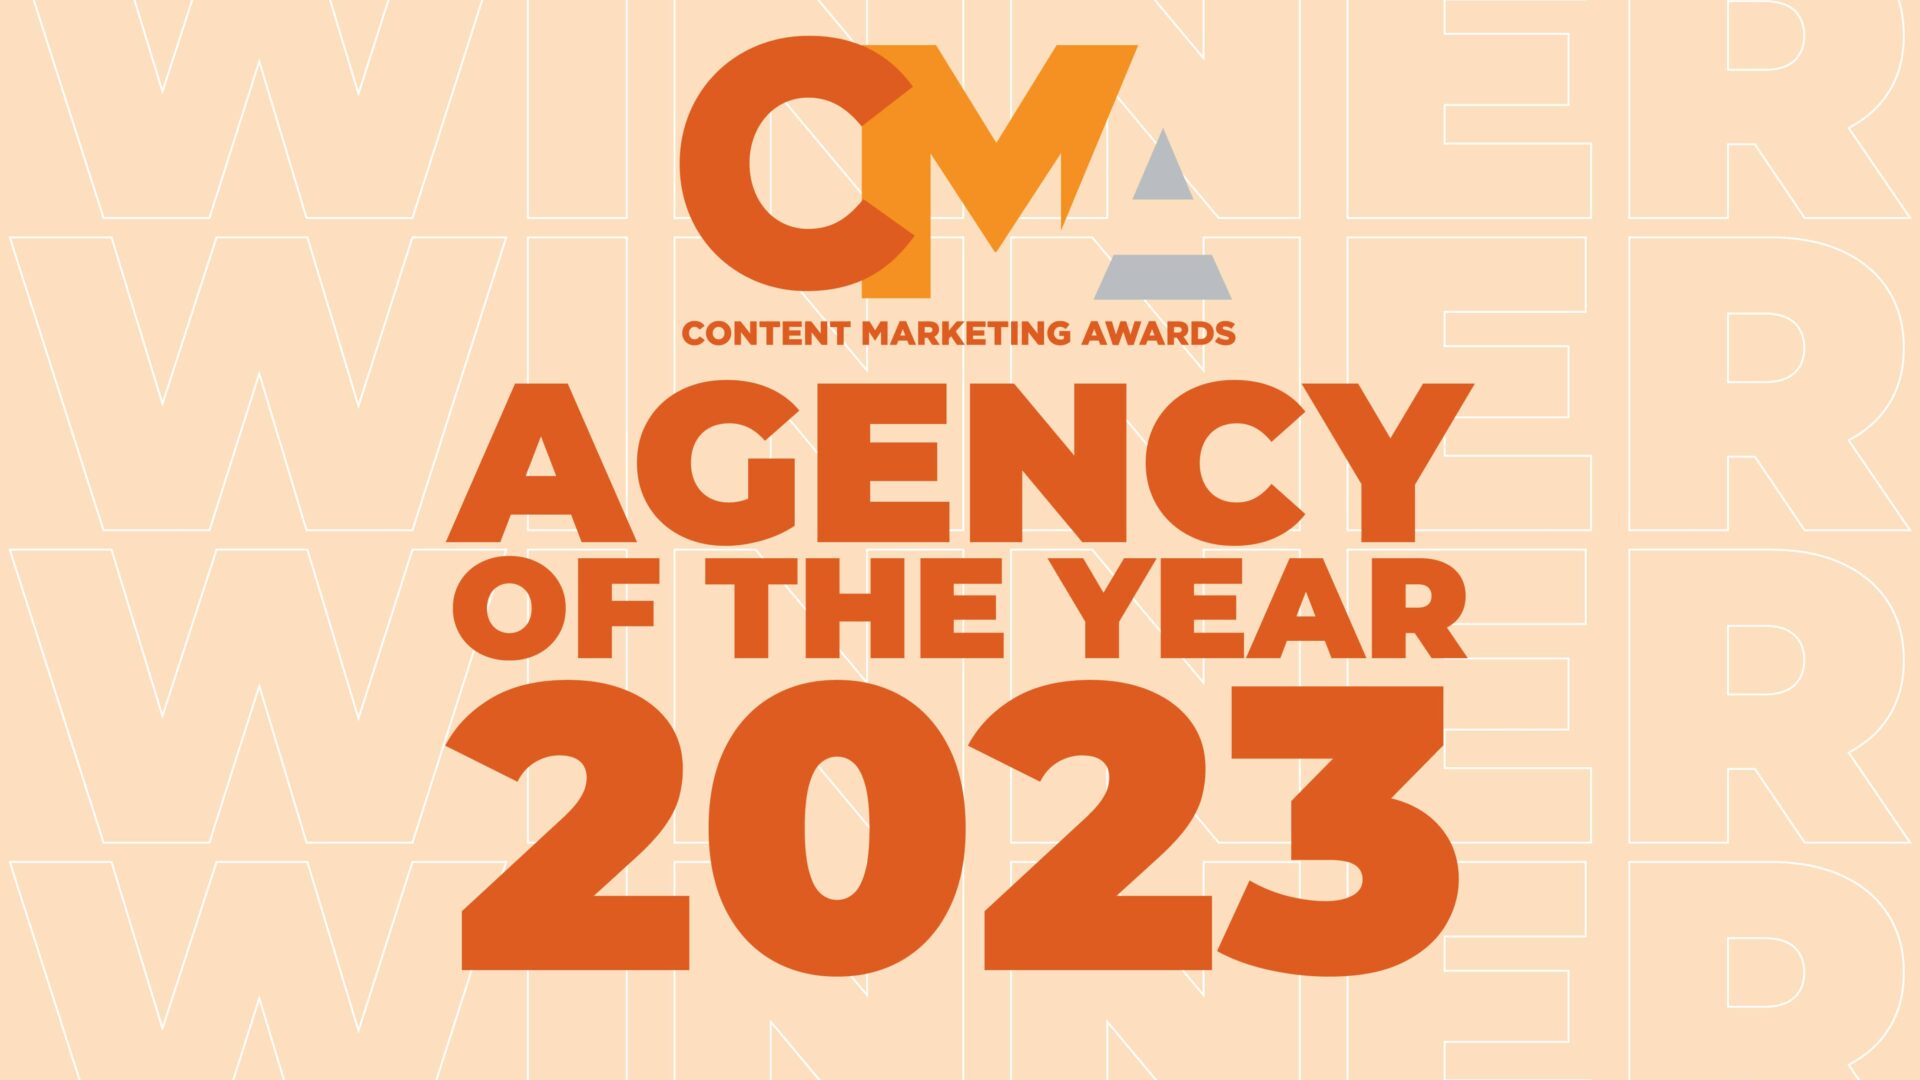 Pace is named agency of the year 2023